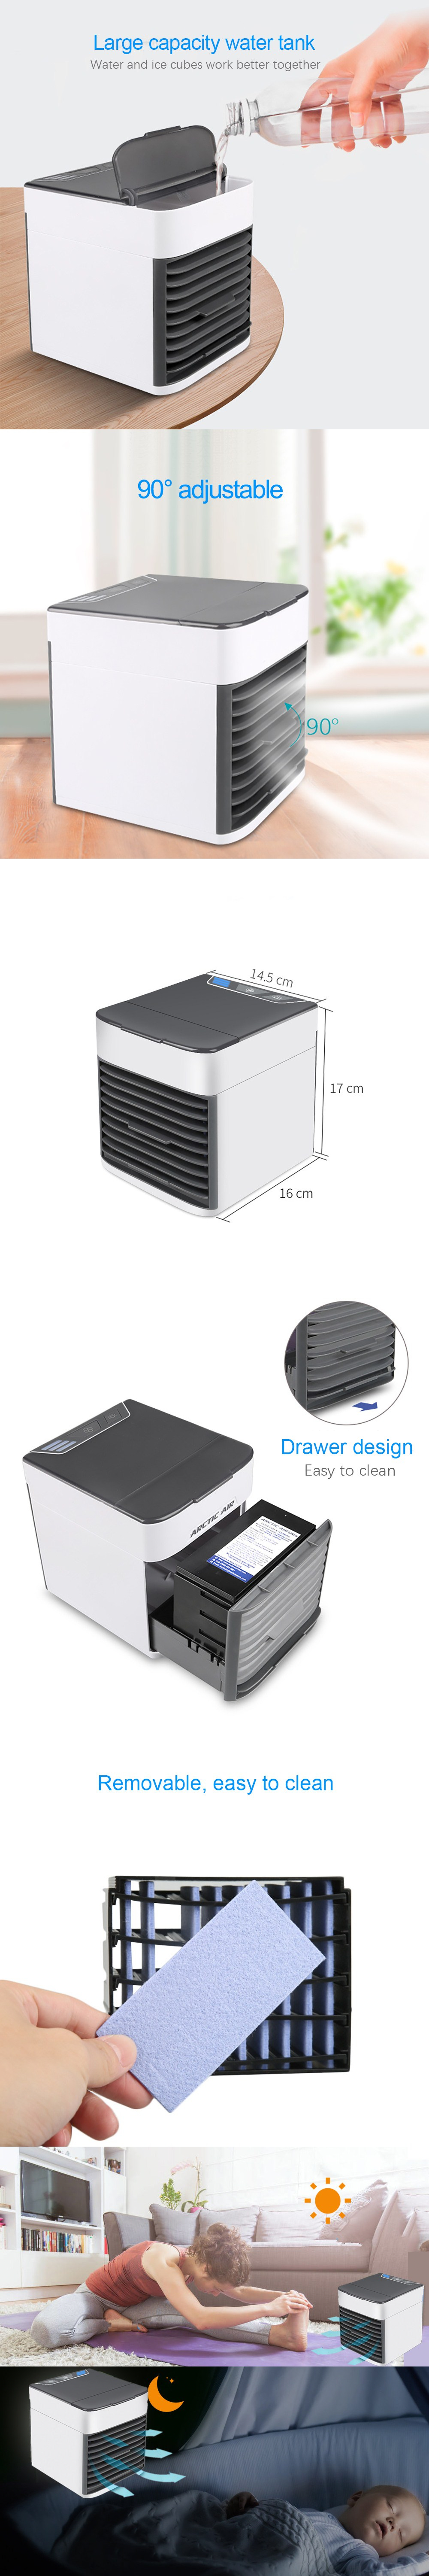 BT-05-Mini-Portable-Multi-function-Spray-Air-Cooler-Household-Fan-USB-Cooling-Air-Conditioner-Dormit-1515838-10